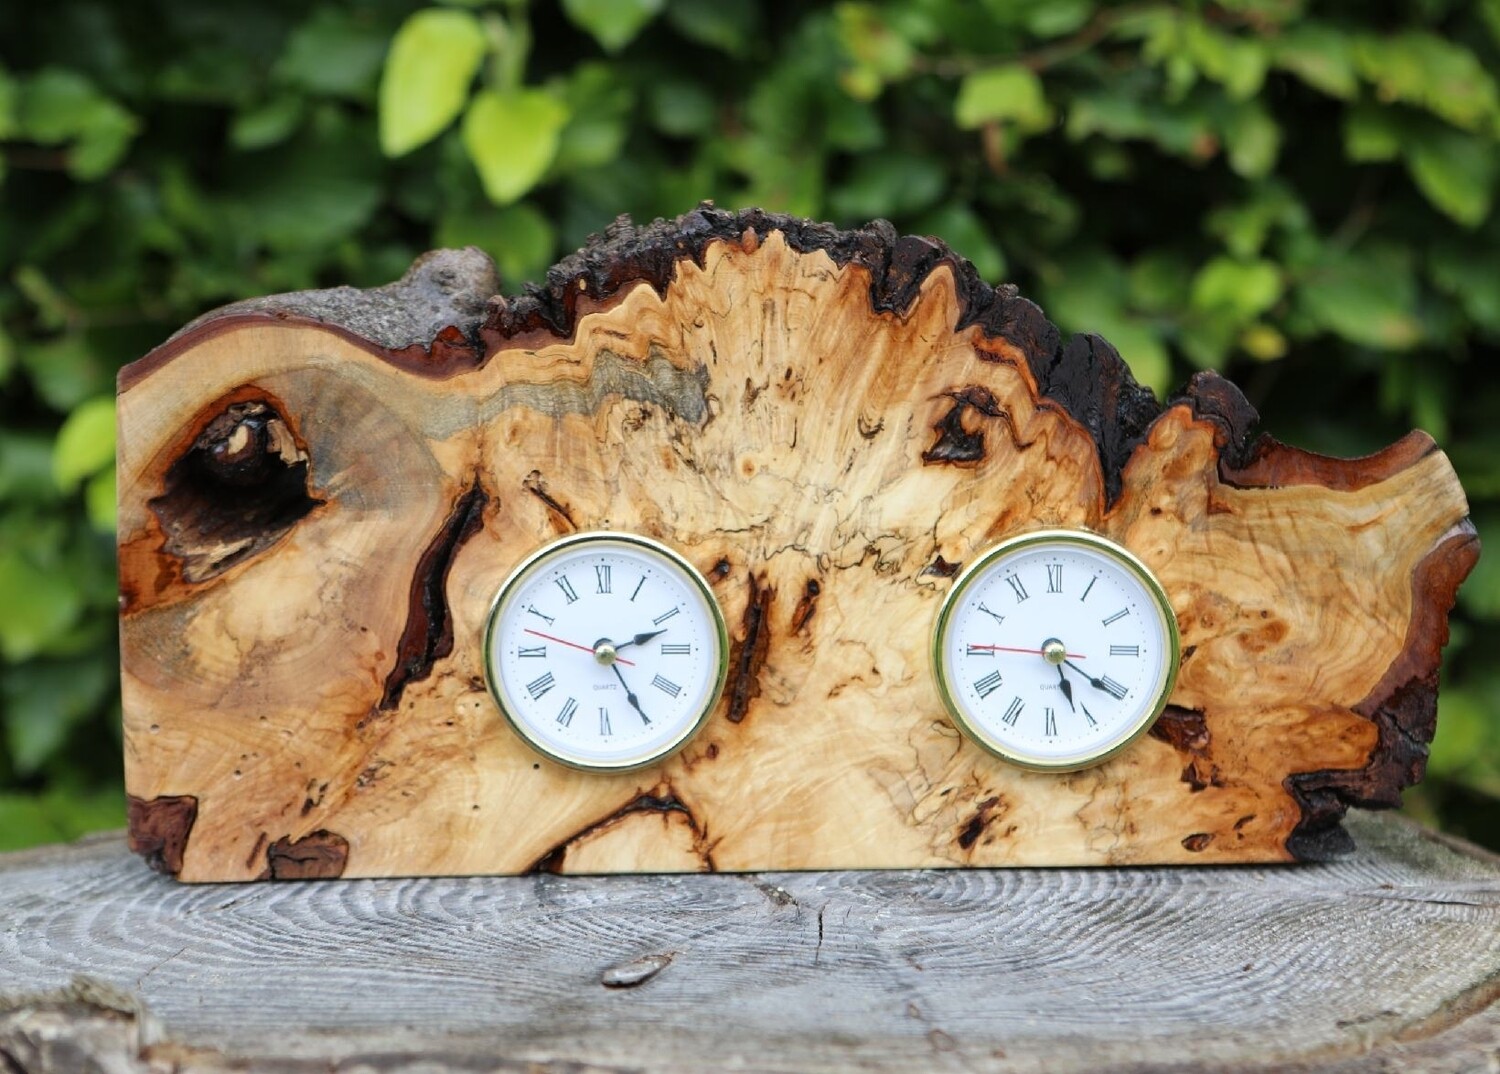 Double Spalted Burl Horse Chestnut Live Edge Wood Clock